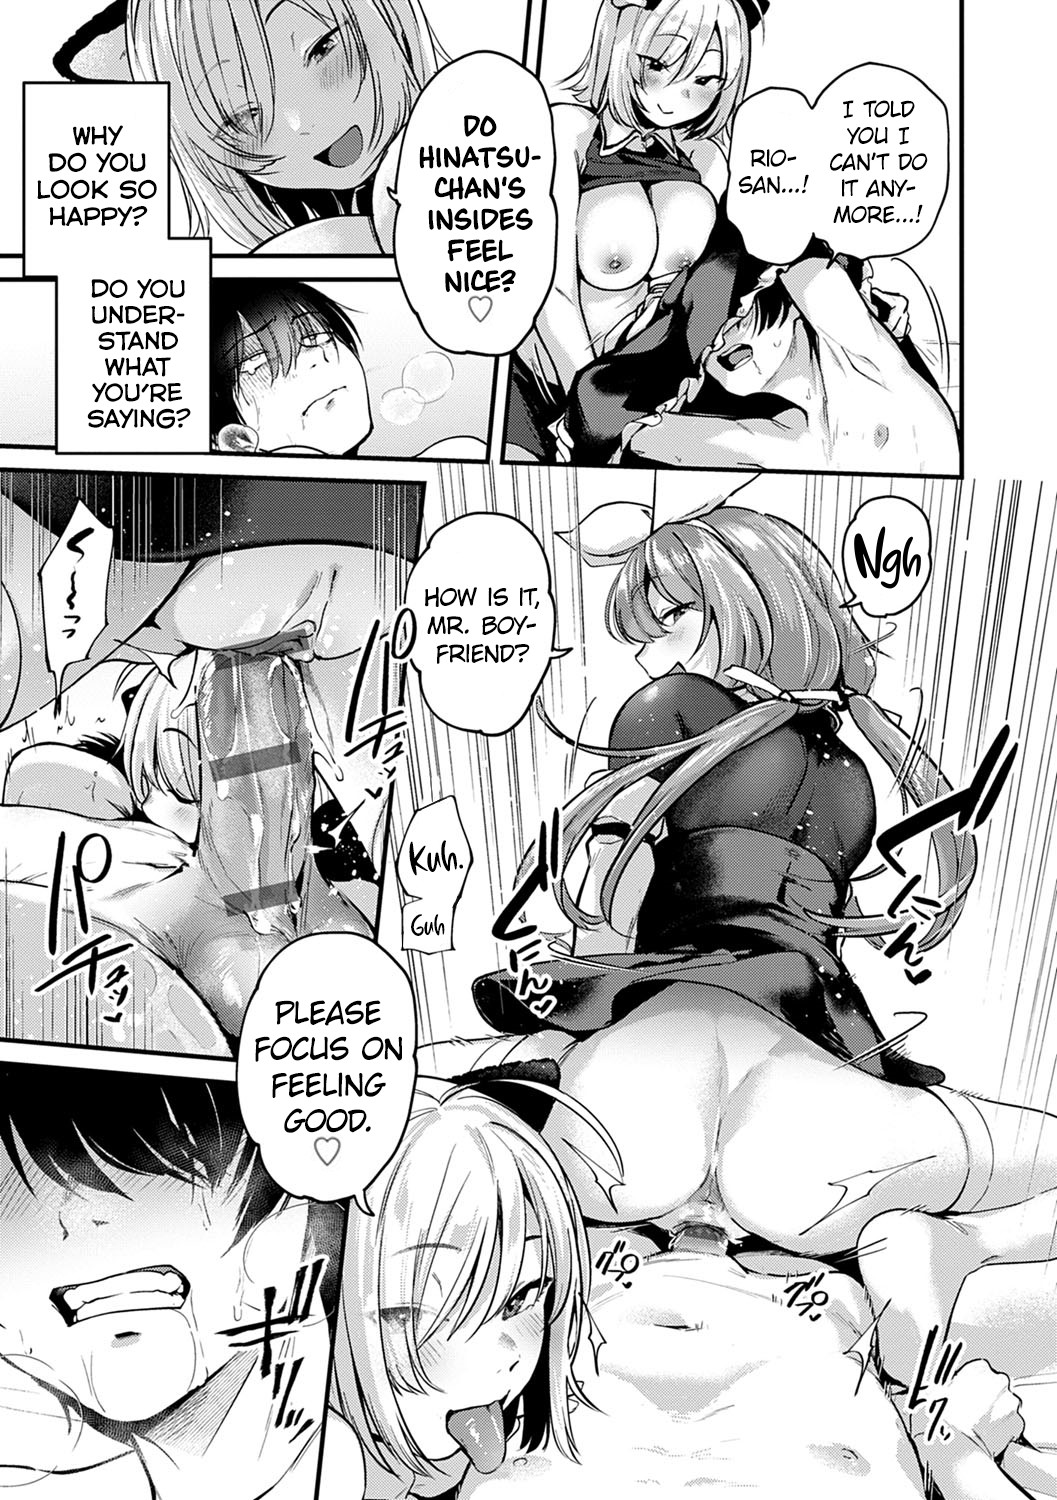 hentai manga Do Doujin Artists Dream of Threesome Sex After Work?